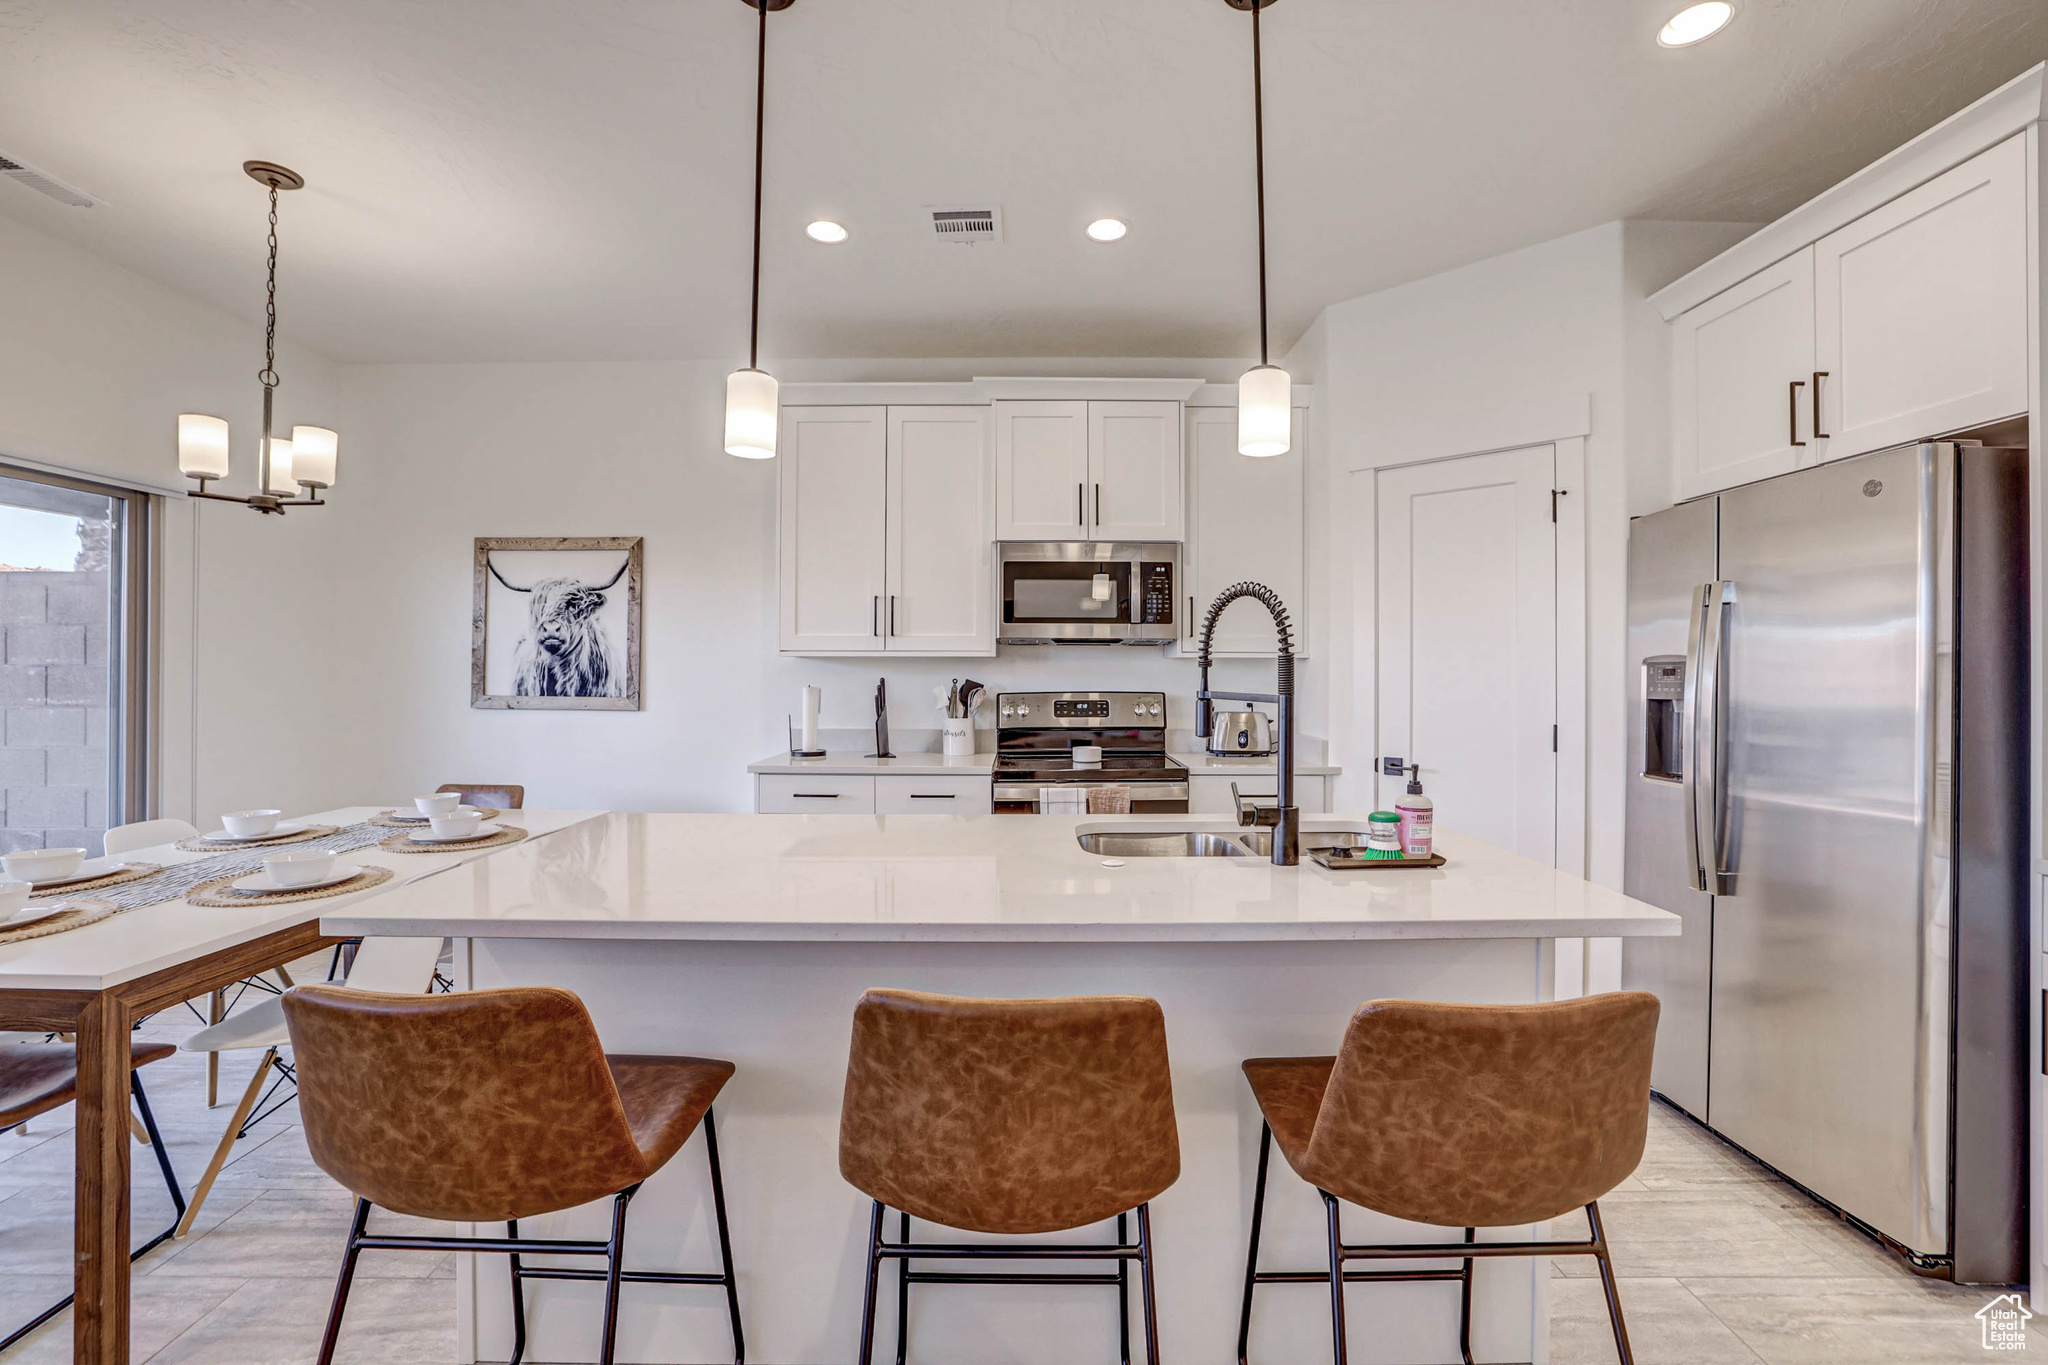 Kitchen with a breakfast bar area, white cabinets, decorative light fixtures, a center island with sink, and stainless steel appliances